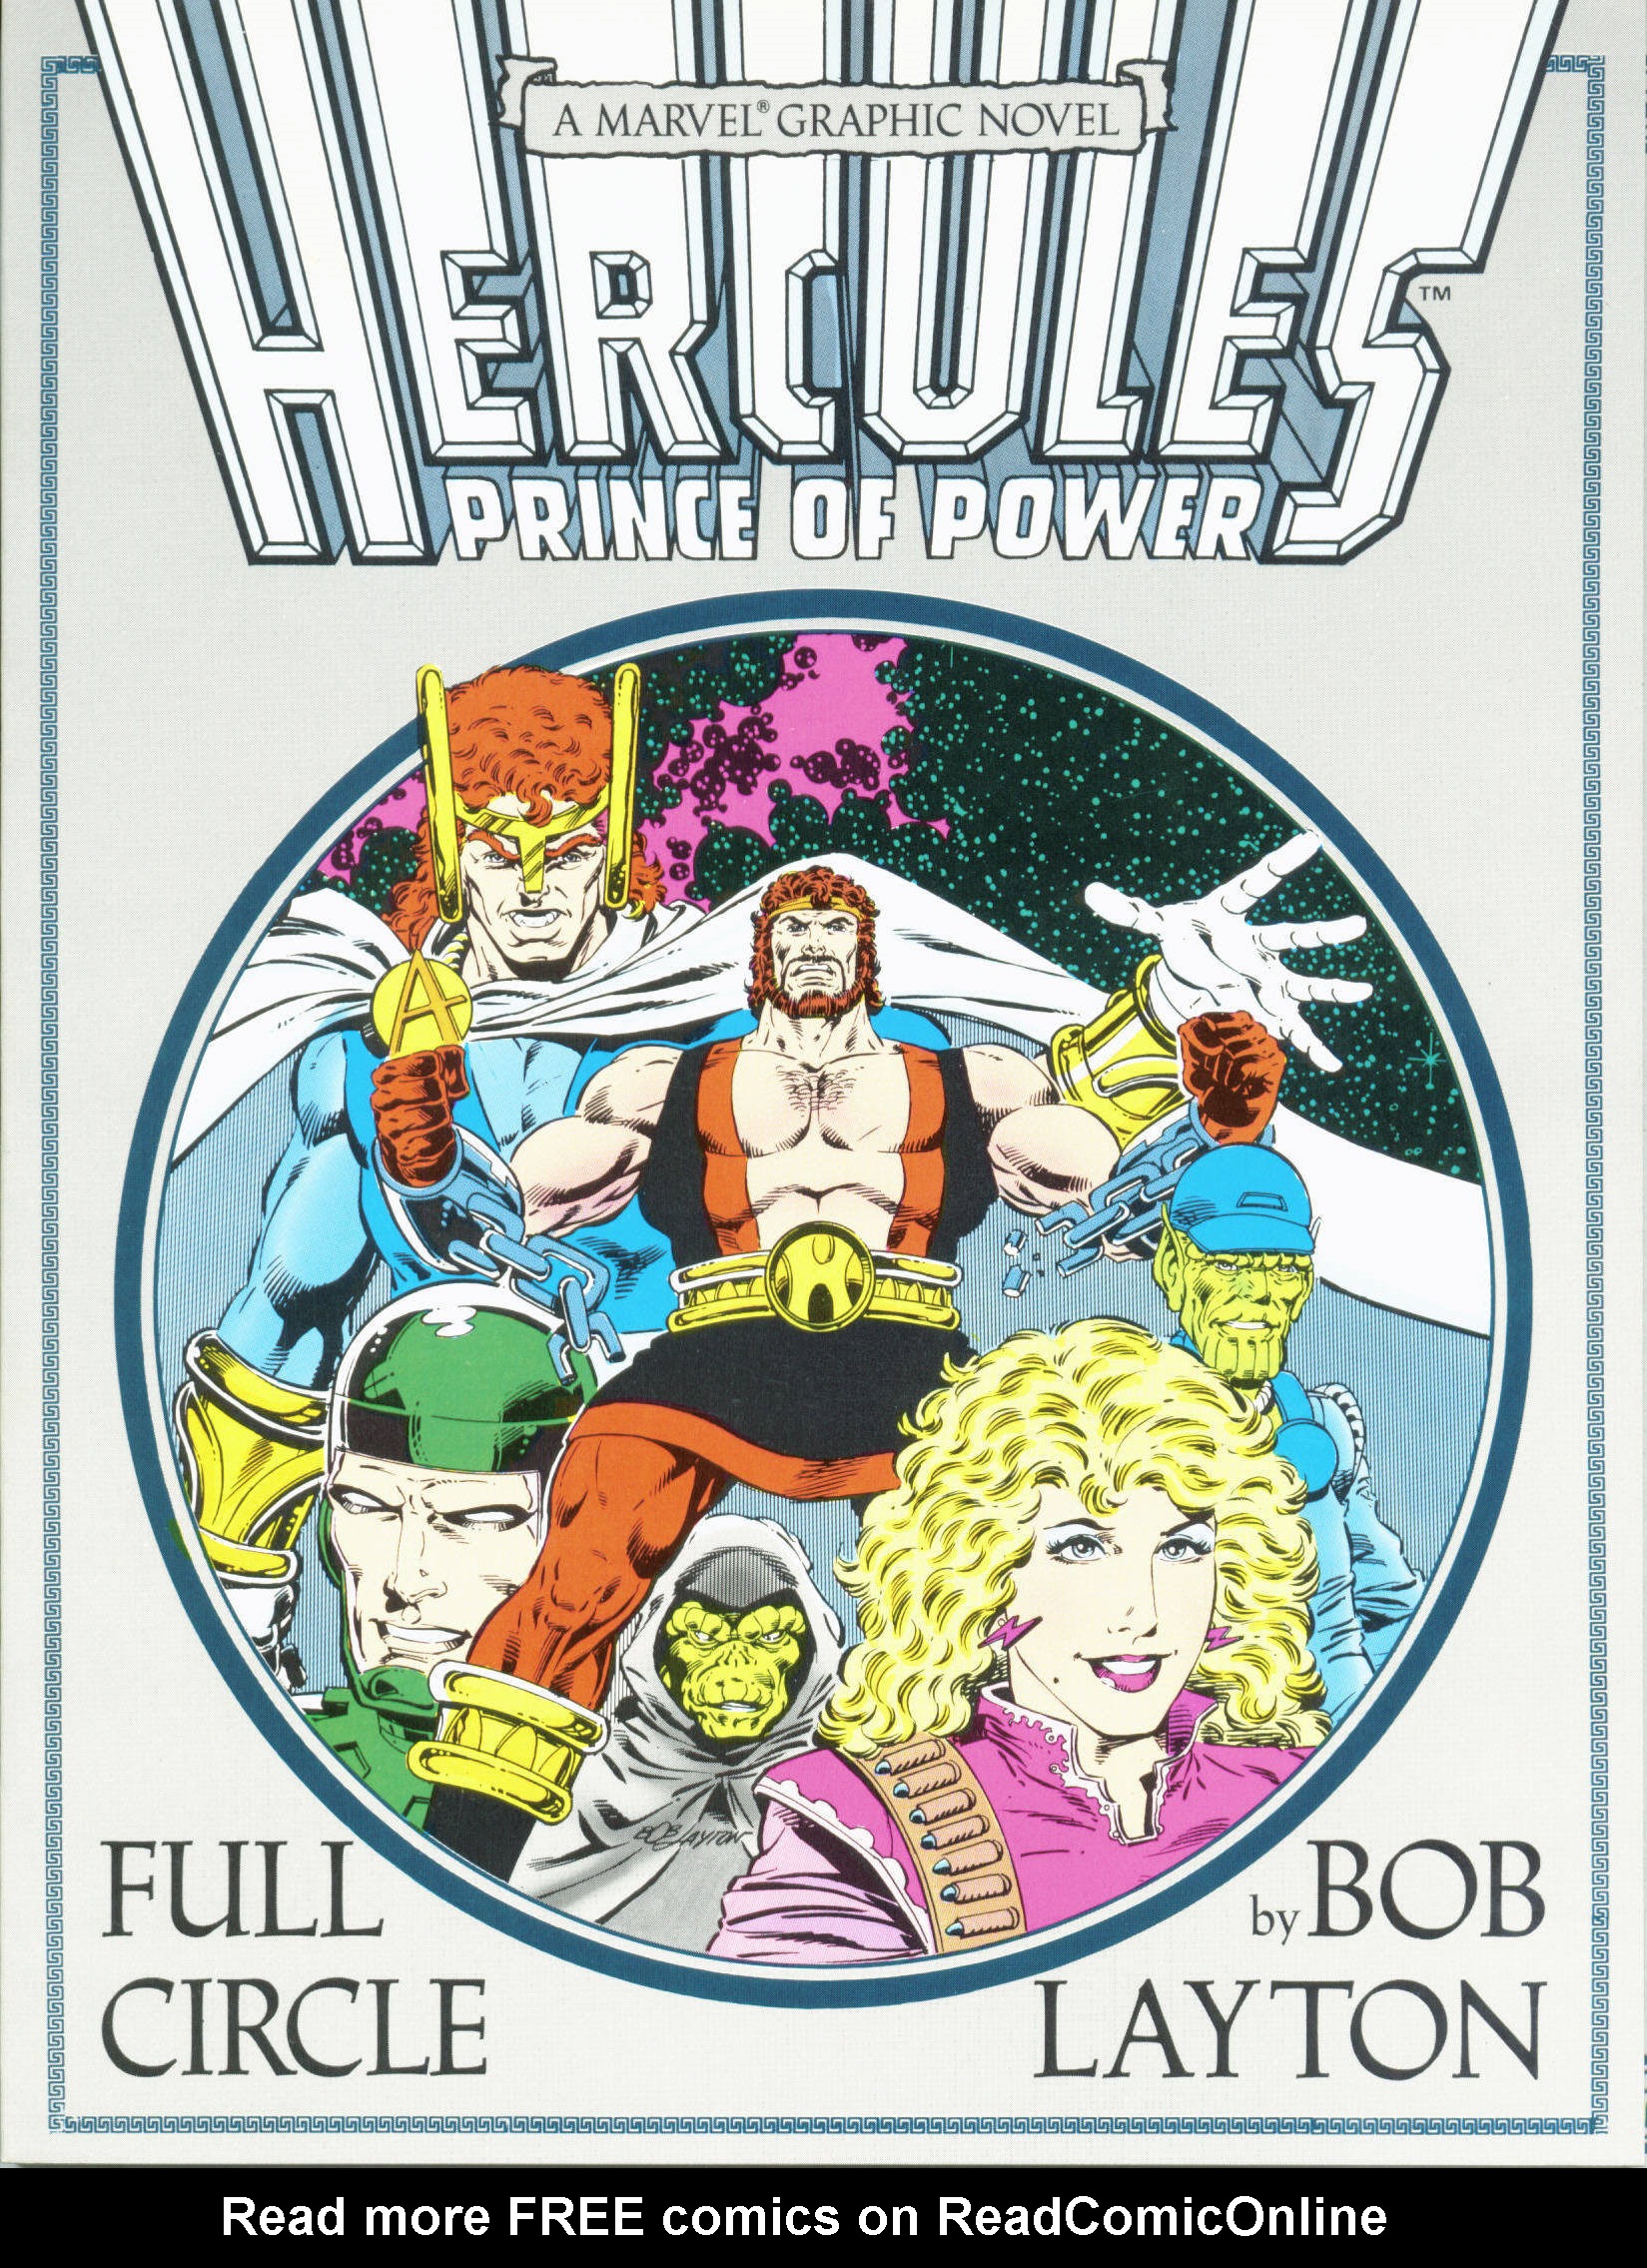 Read online Marvel Graphic Novel comic -  Issue #37 - Hercules Prince of Power - Full Circle - 1